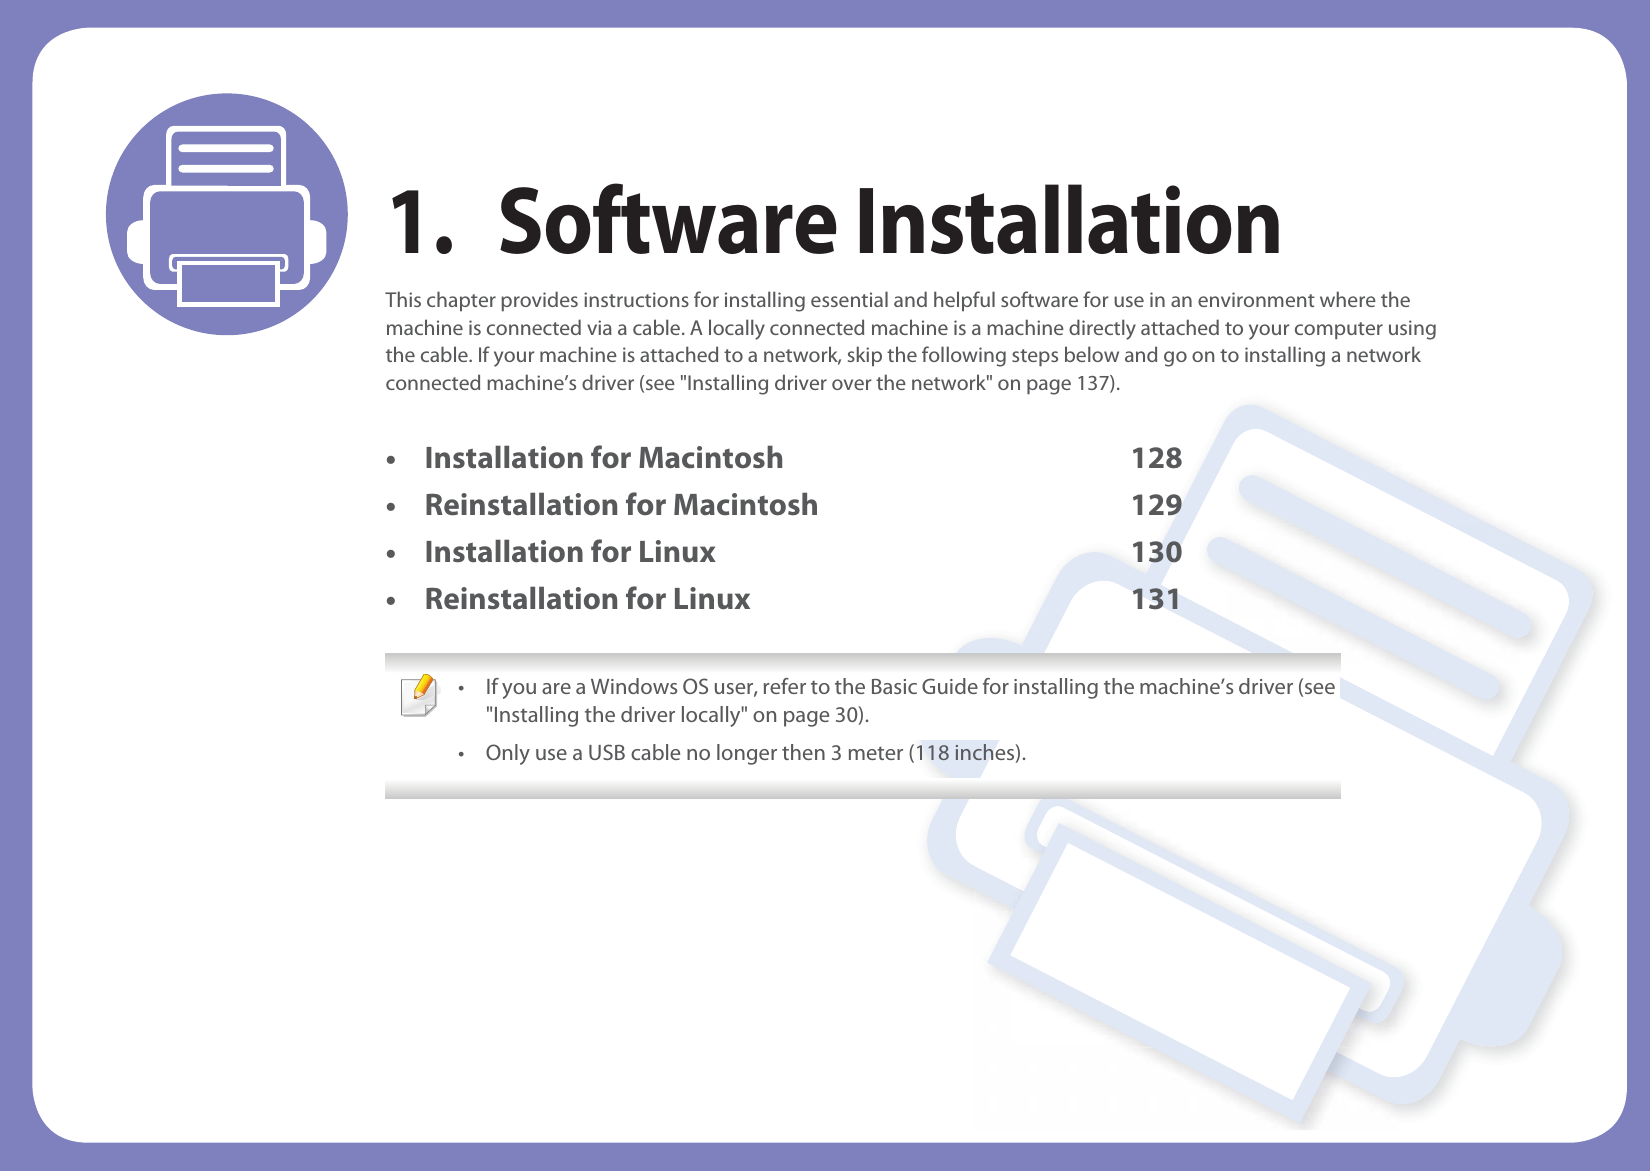 1. Software InstallationThis chapter provides instructions for installing essential and helpful software for use in an environment where the machine is connected via a cable. A locally connected machine is a machine directly attached to your computer using the cable. If your machine is attached to a network, skip the following steps below and go on to installing a network connected machine’s driver (see &quot;Installing driver over the network&quot; on page 137).• Installation for Macintosh 128• Reinstallation for Macintosh 129• Installation for Linux 130• Reinstallation for Linux 131 • If you are a Windows OS user, refer to the Basic Guide for installing the machine’s driver (see &quot;Installing the driver locally&quot; on page 30).• Only use a USB cable no longer then 3 meter (118 inches). 